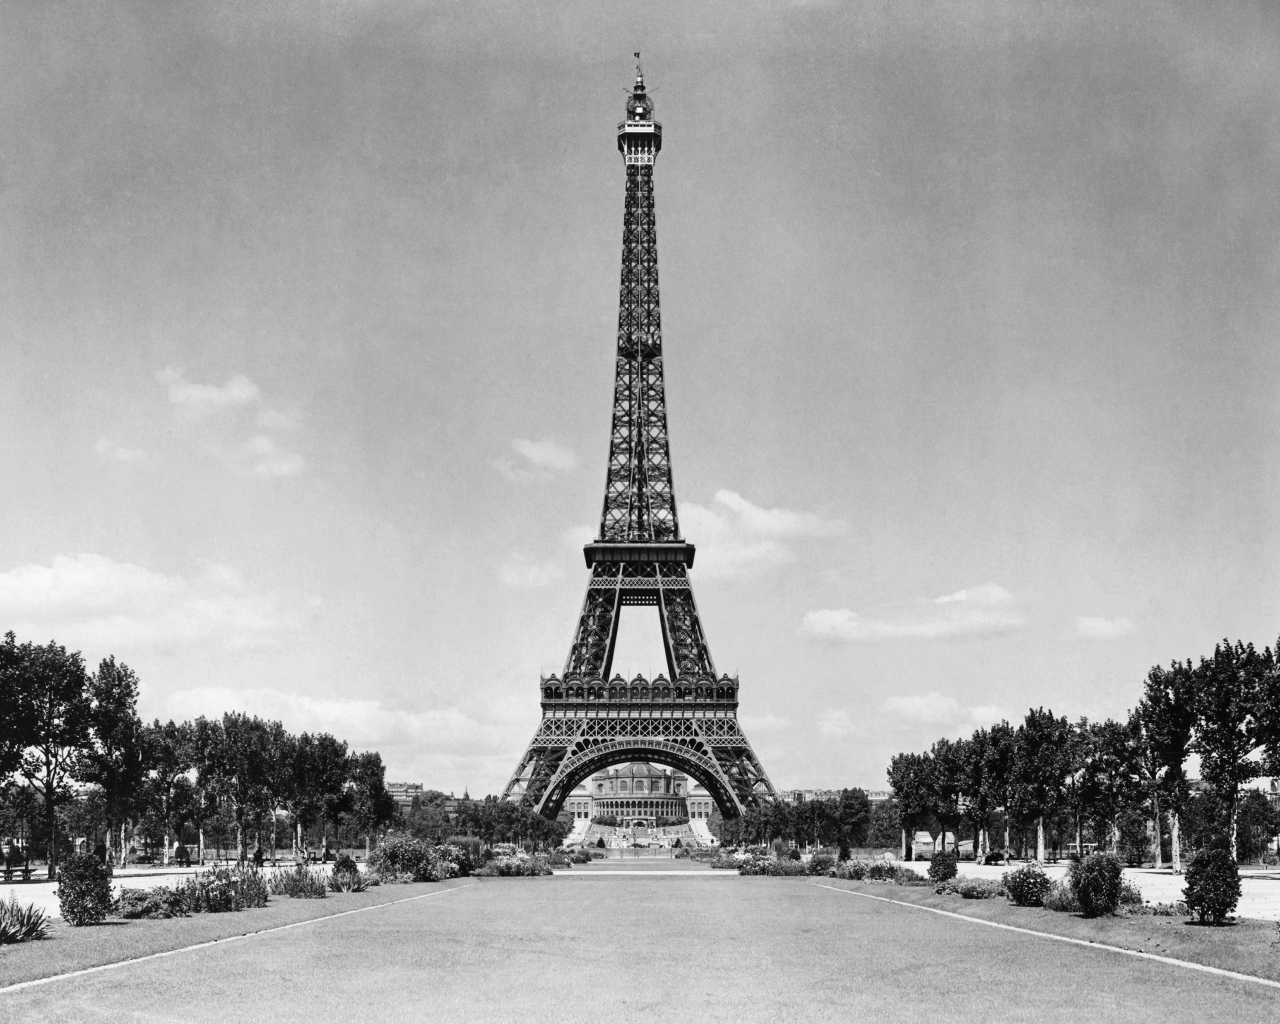 The Eiffel Tower and the park, black and white photo